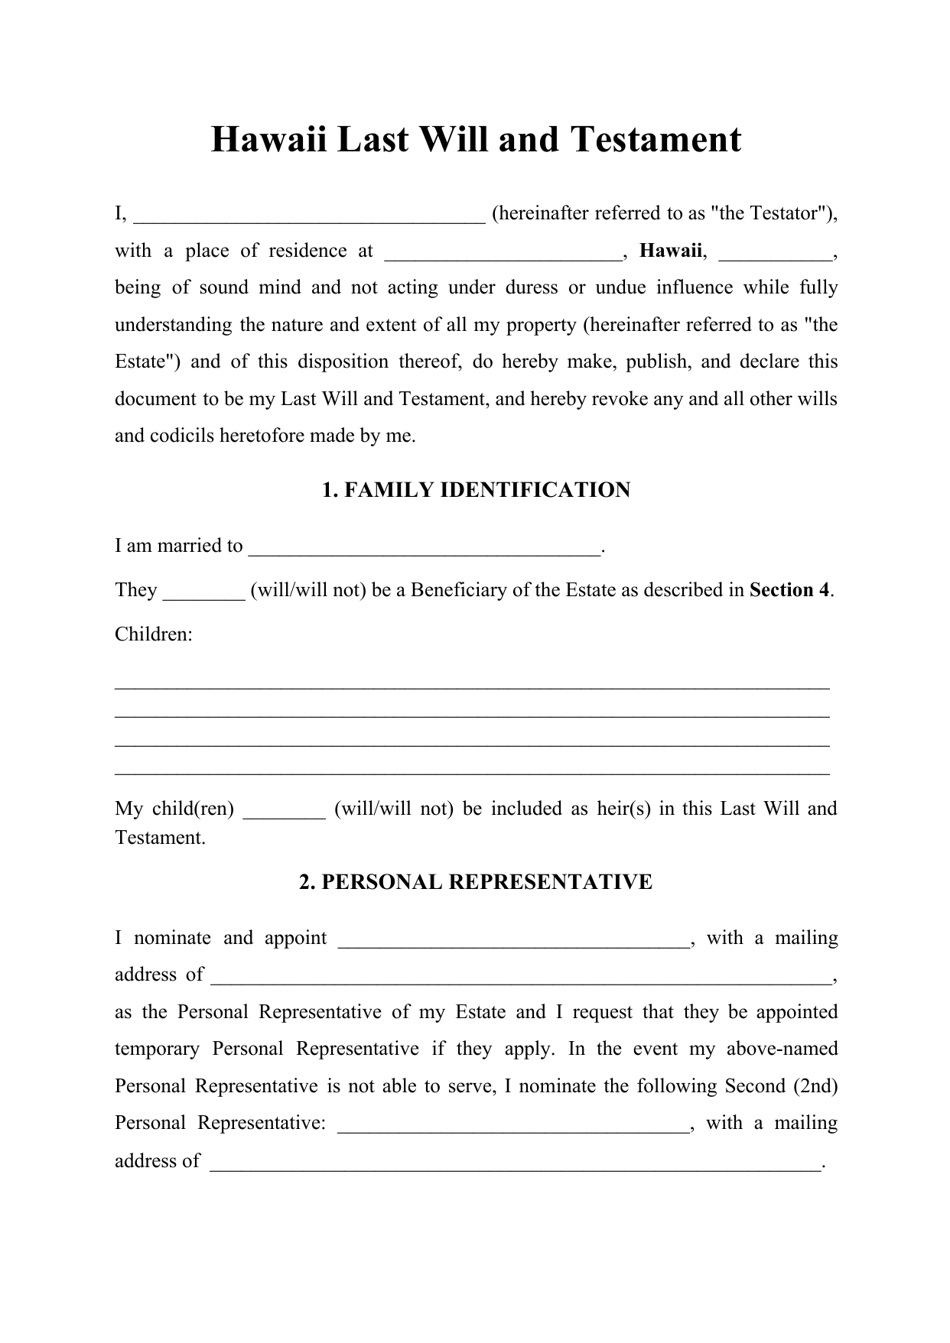 Last Will and Testament Template - Hawaii, Page 1